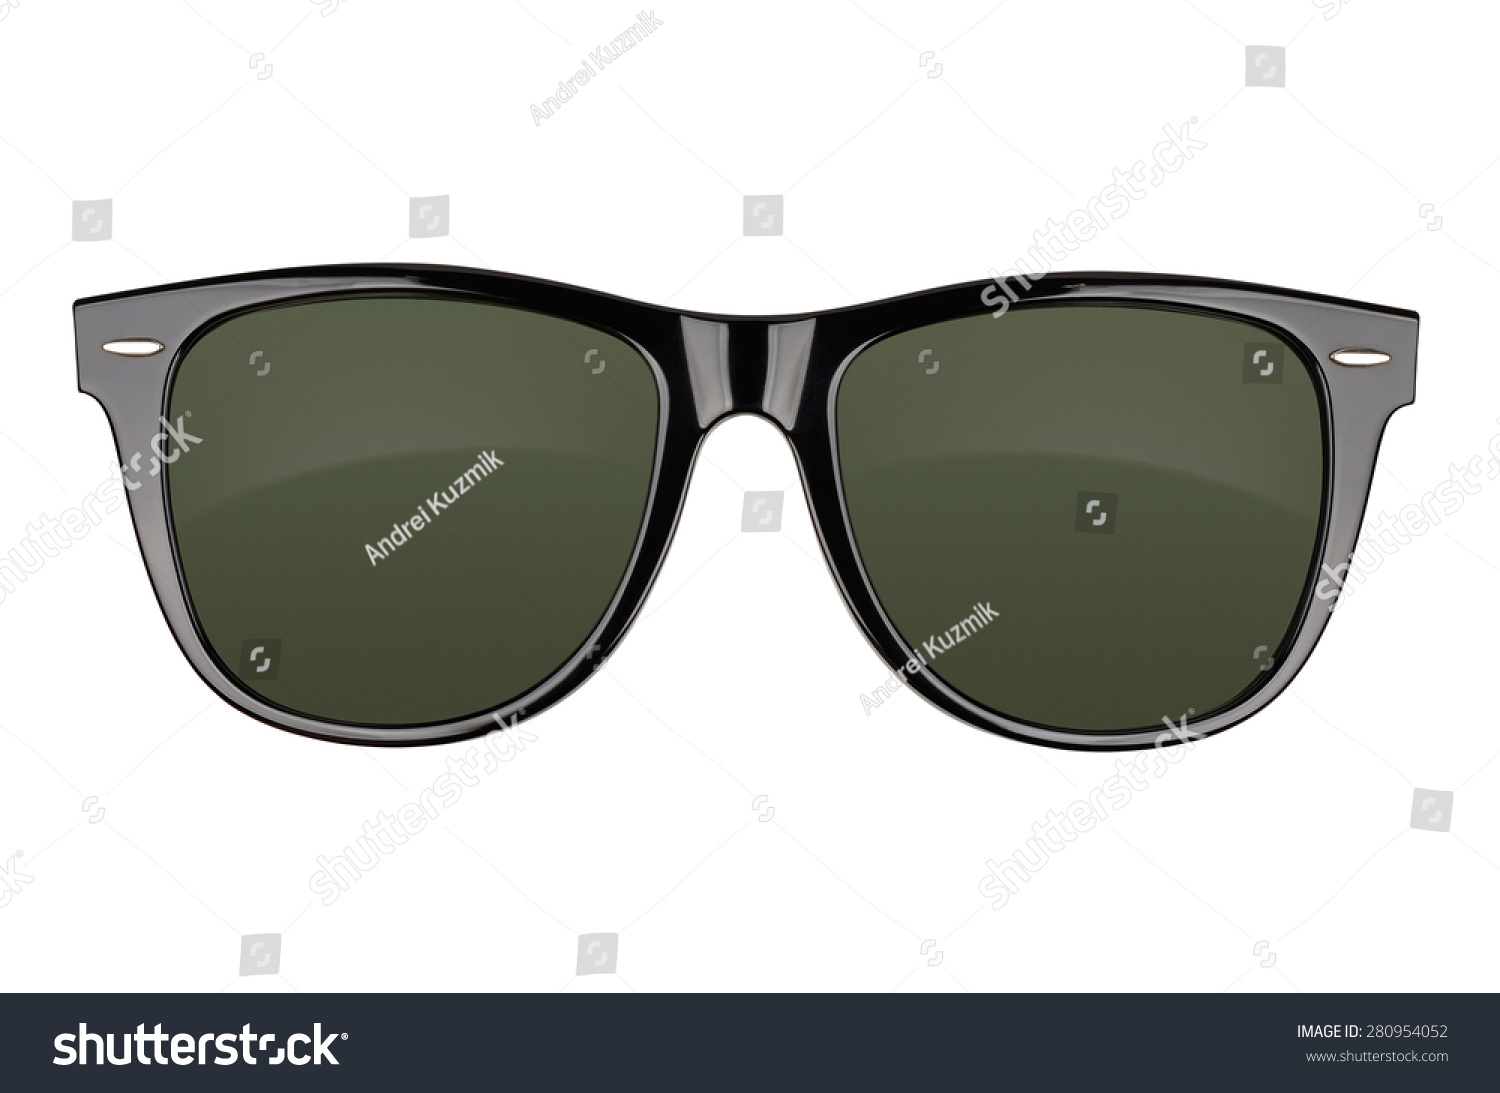 Black sunglasses isolated on white background. With clipping path #280954052